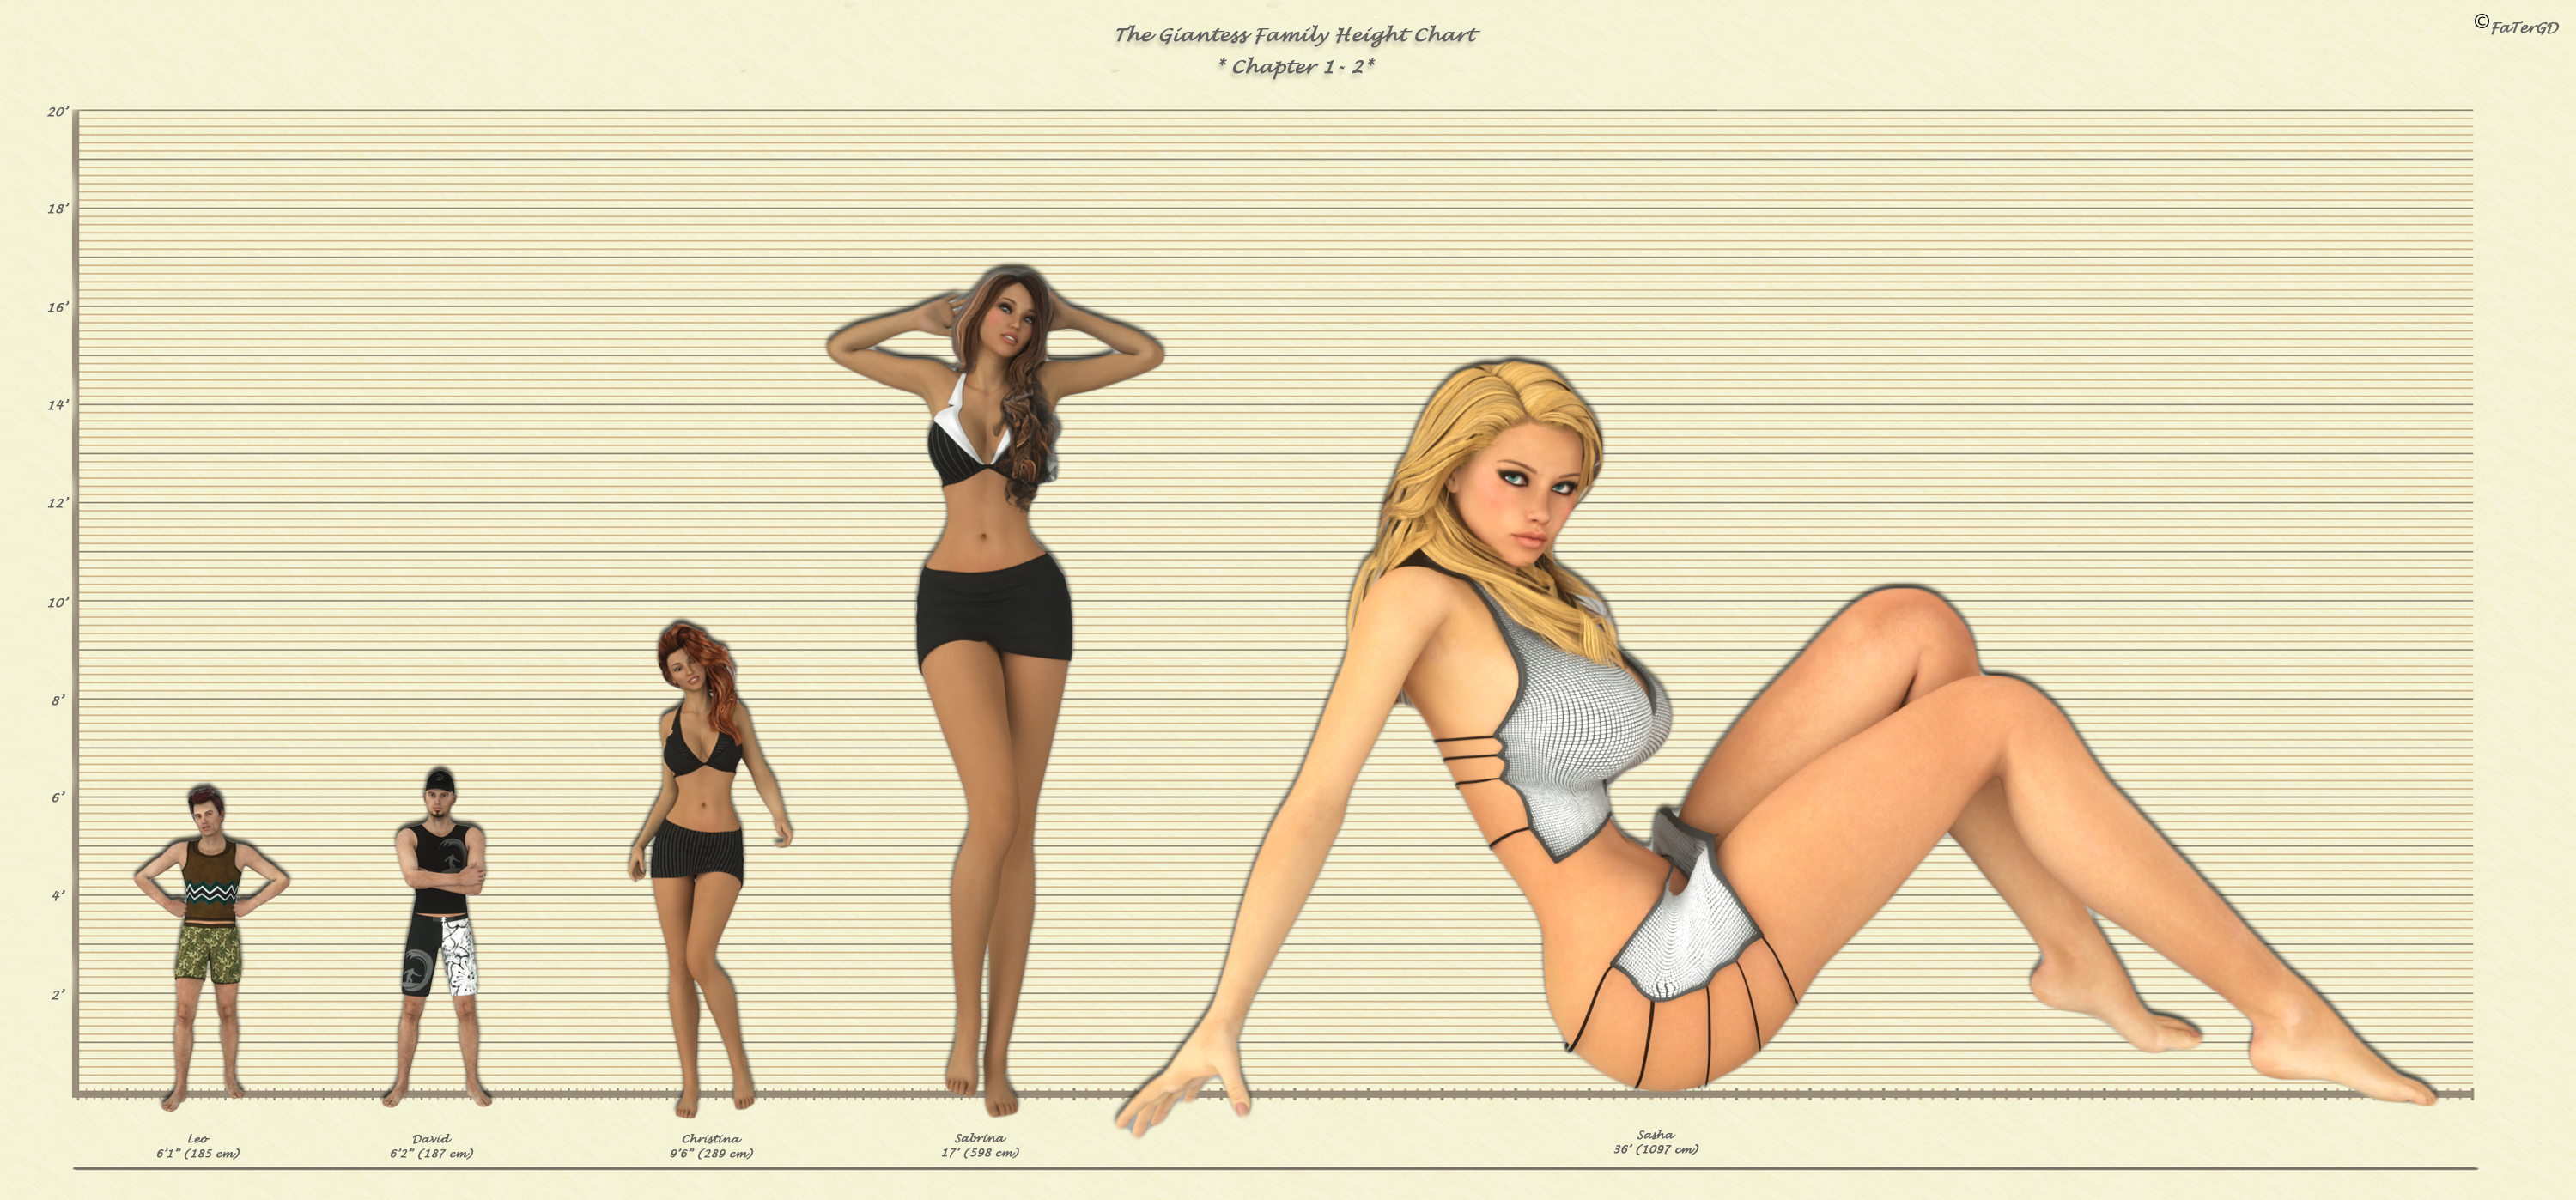 Character Height Charts Comparison By FaTerKCX On DeviantArt.